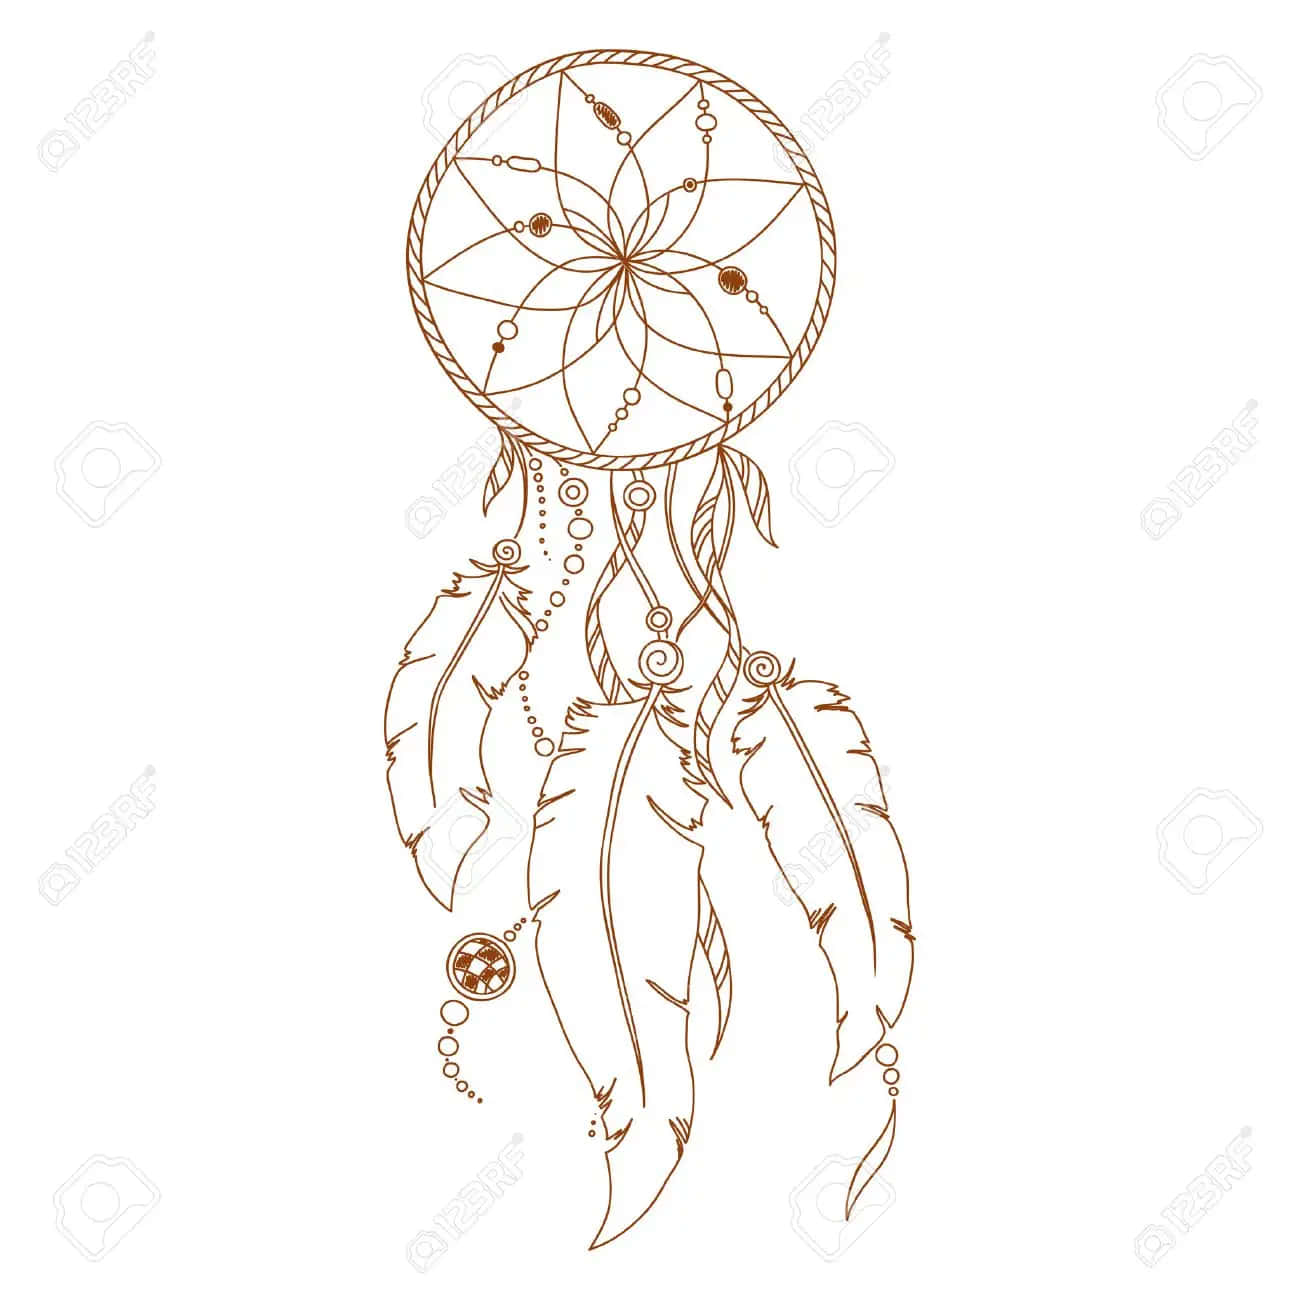 Dream Catcher With Feathers On A White Background